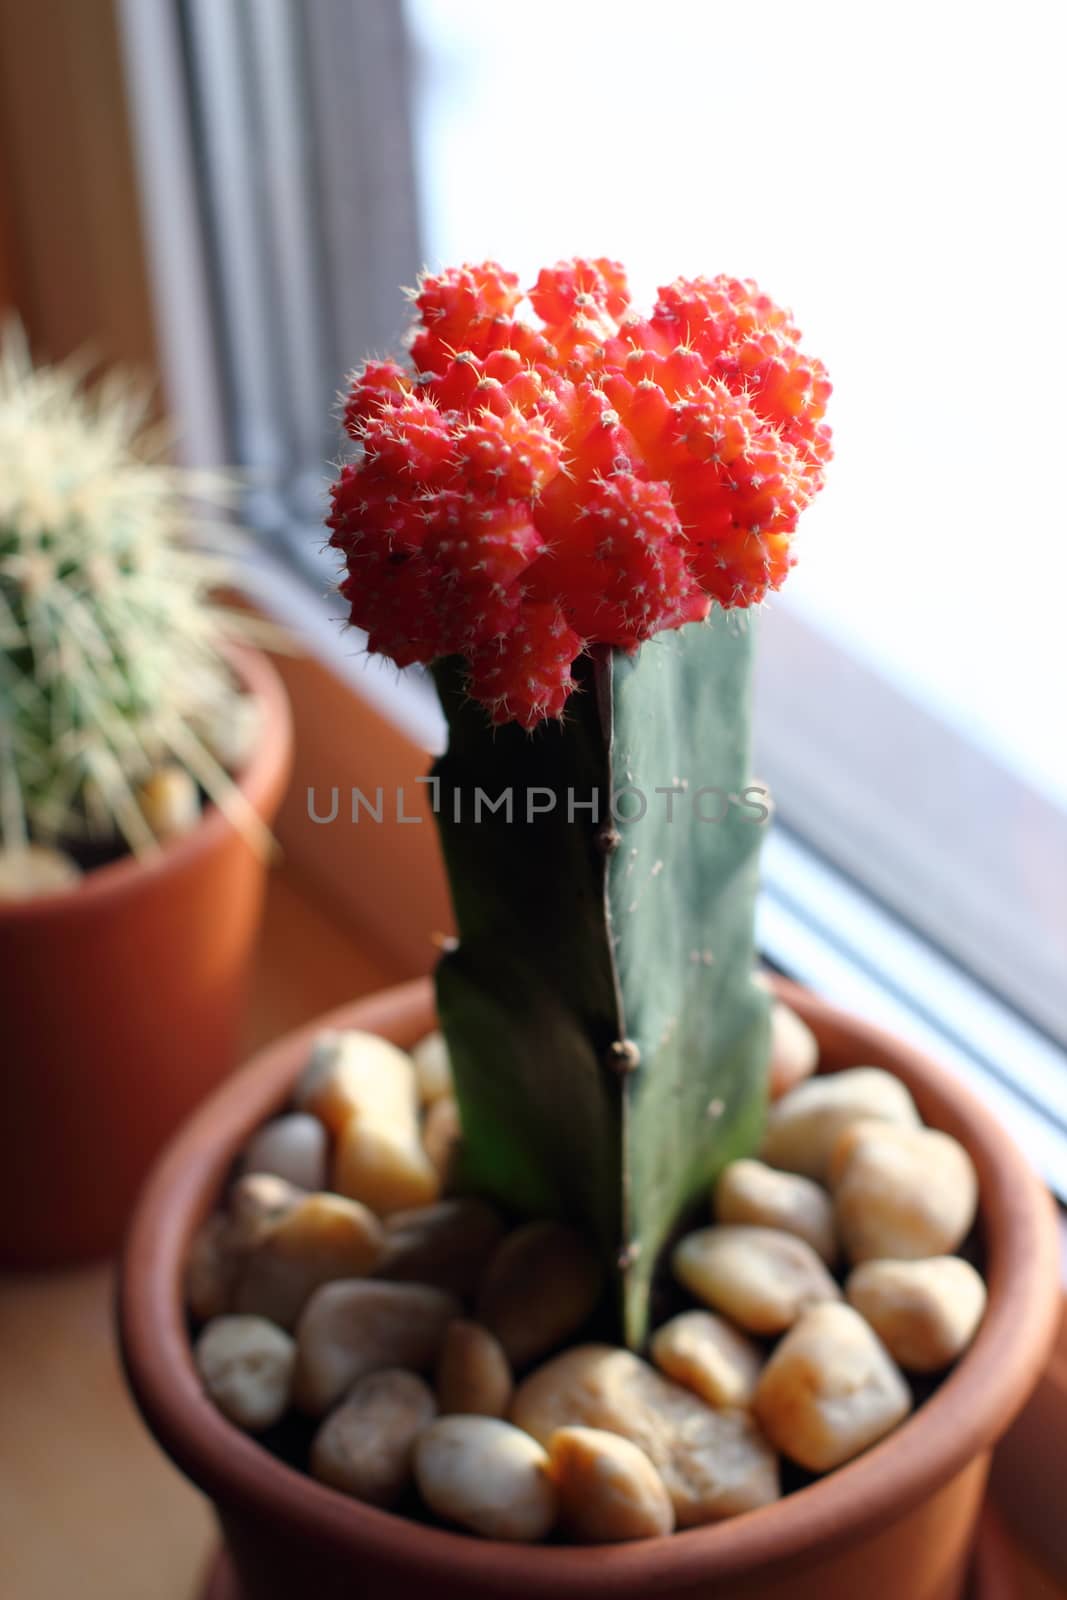 Cactus with red cap by Metanna